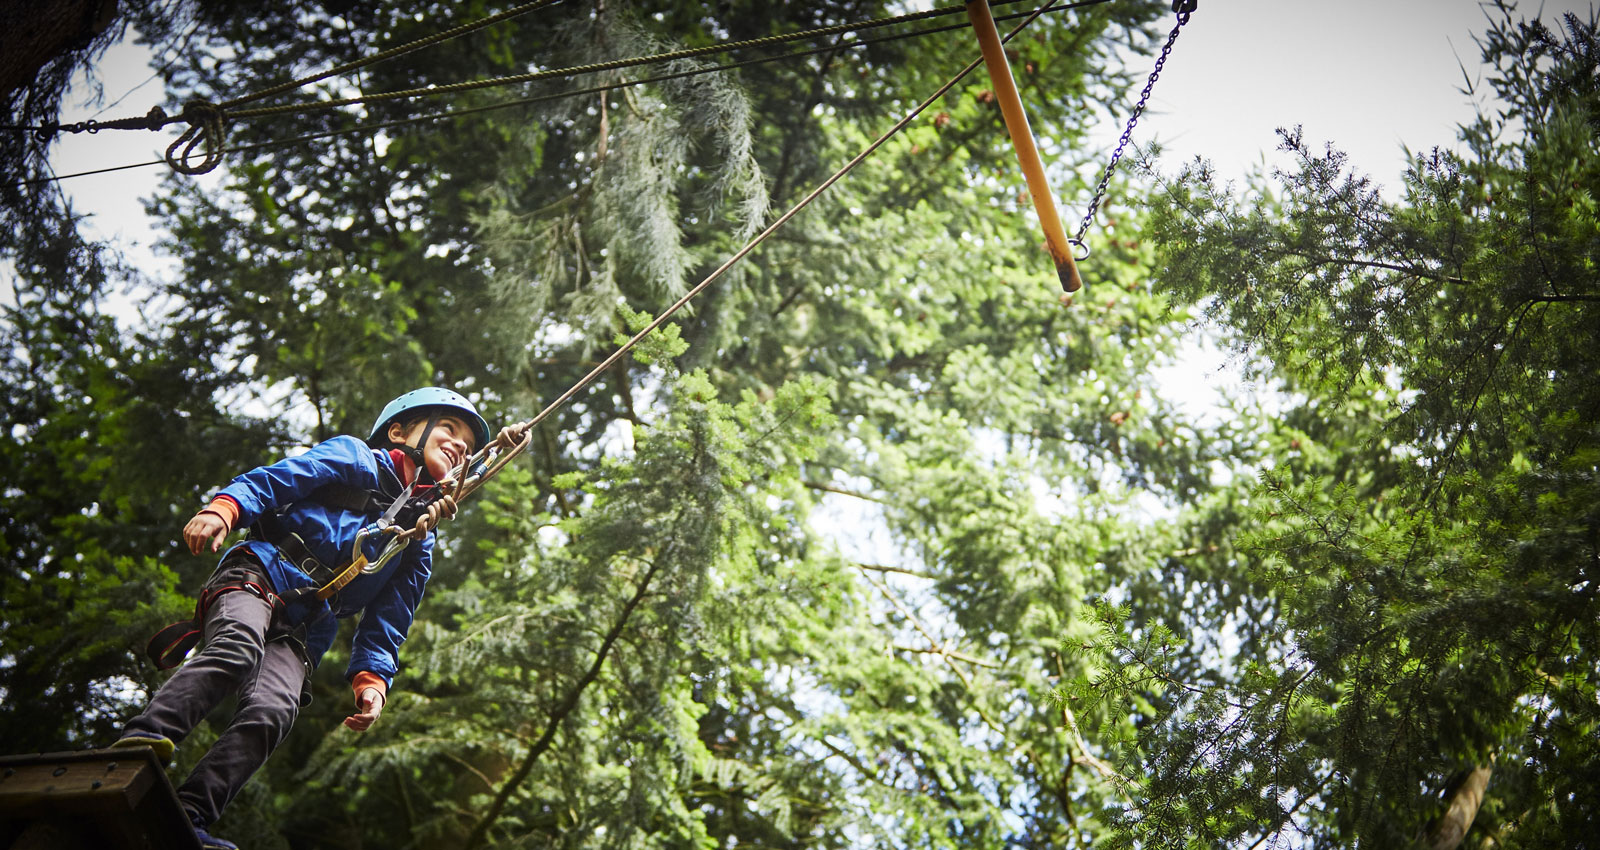 PGL Adventure Holidays - Specialist Holidays and Summer Camps for 7-17 year olds - Information for Parents